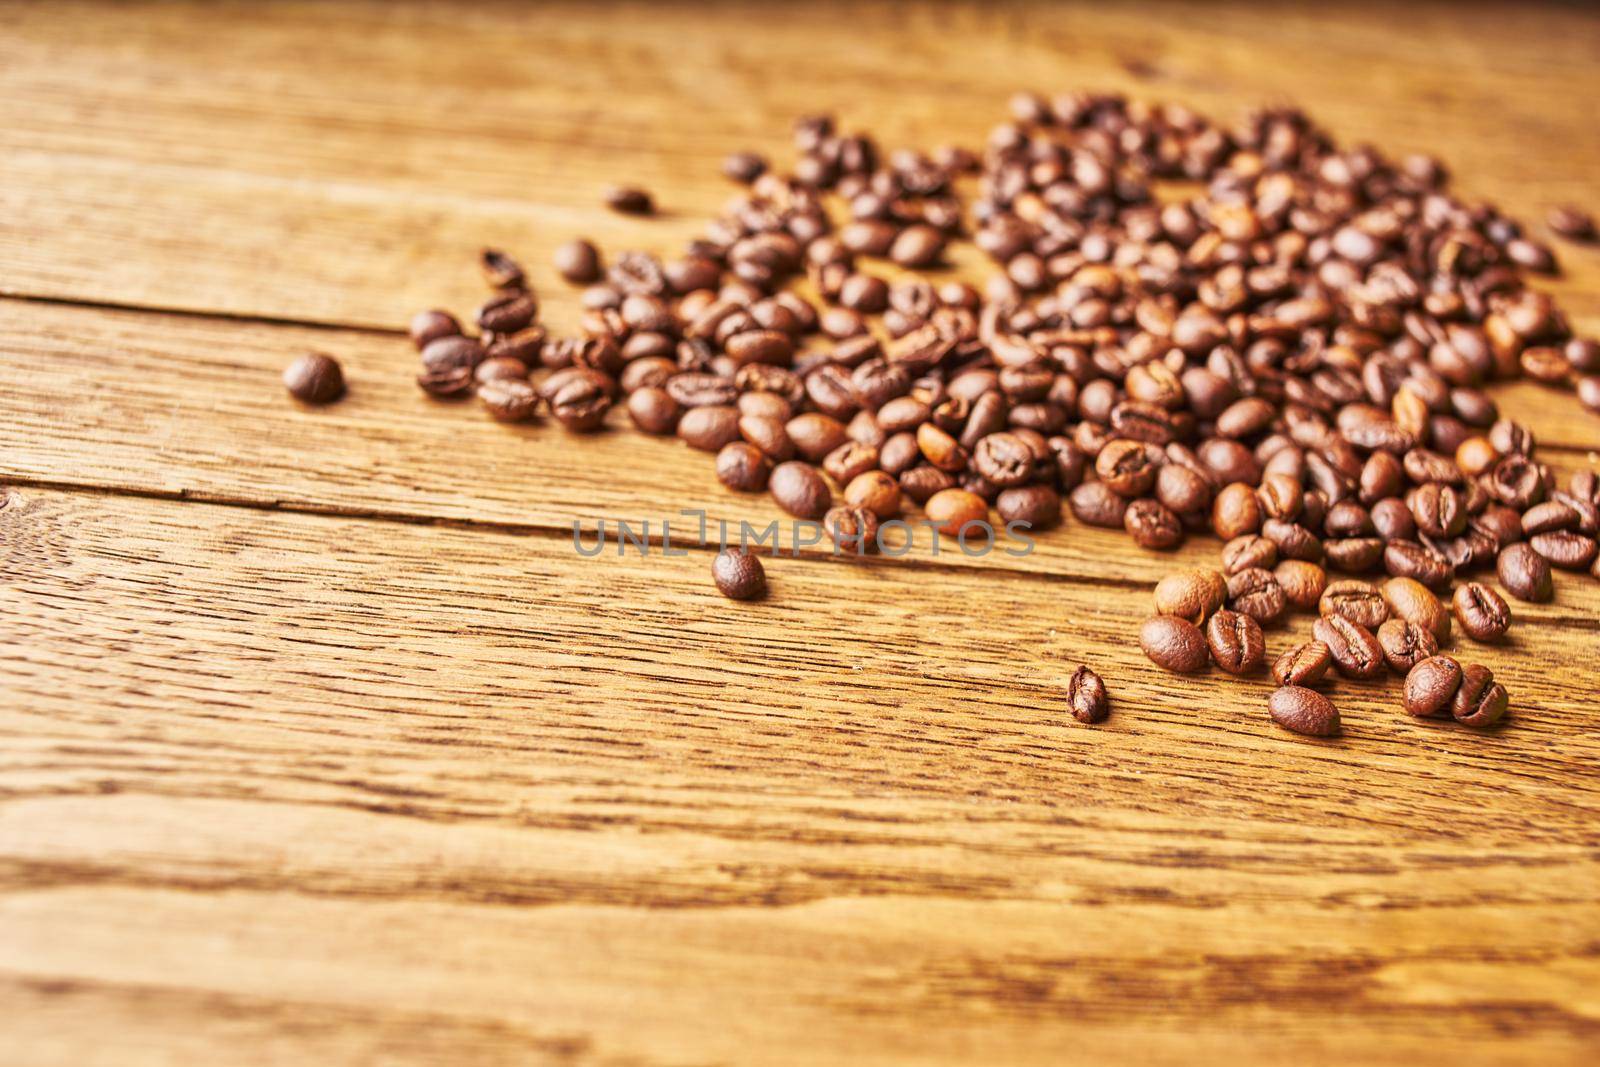 Grain bag gourmet latte pictures wood background. High quality photo